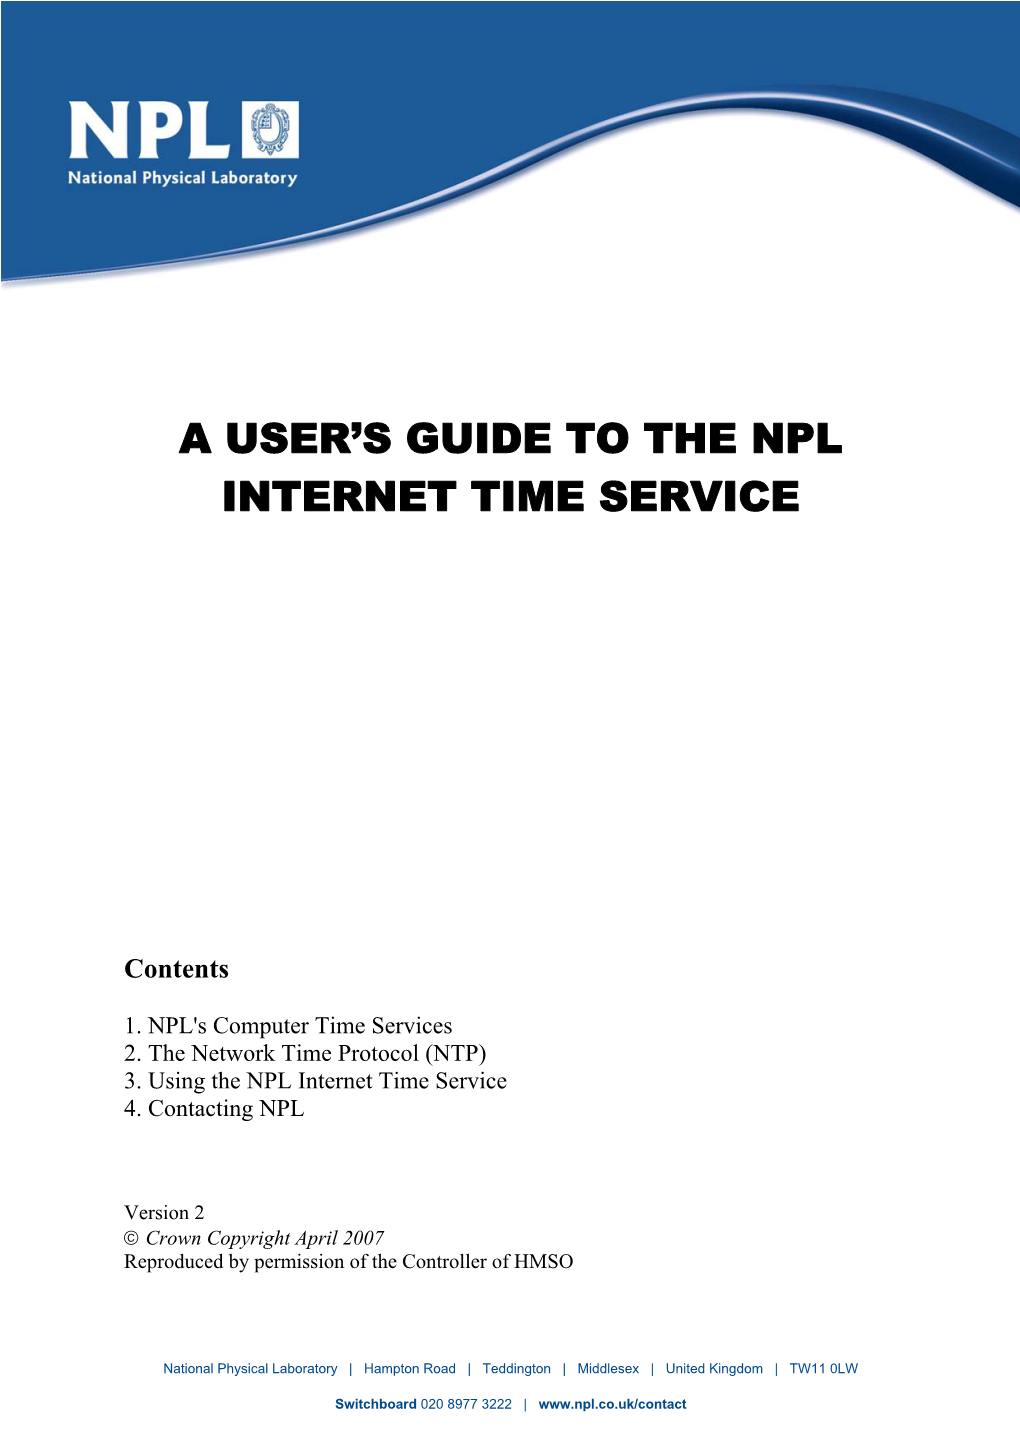 A User's Guide to the Npl Internet Time Service